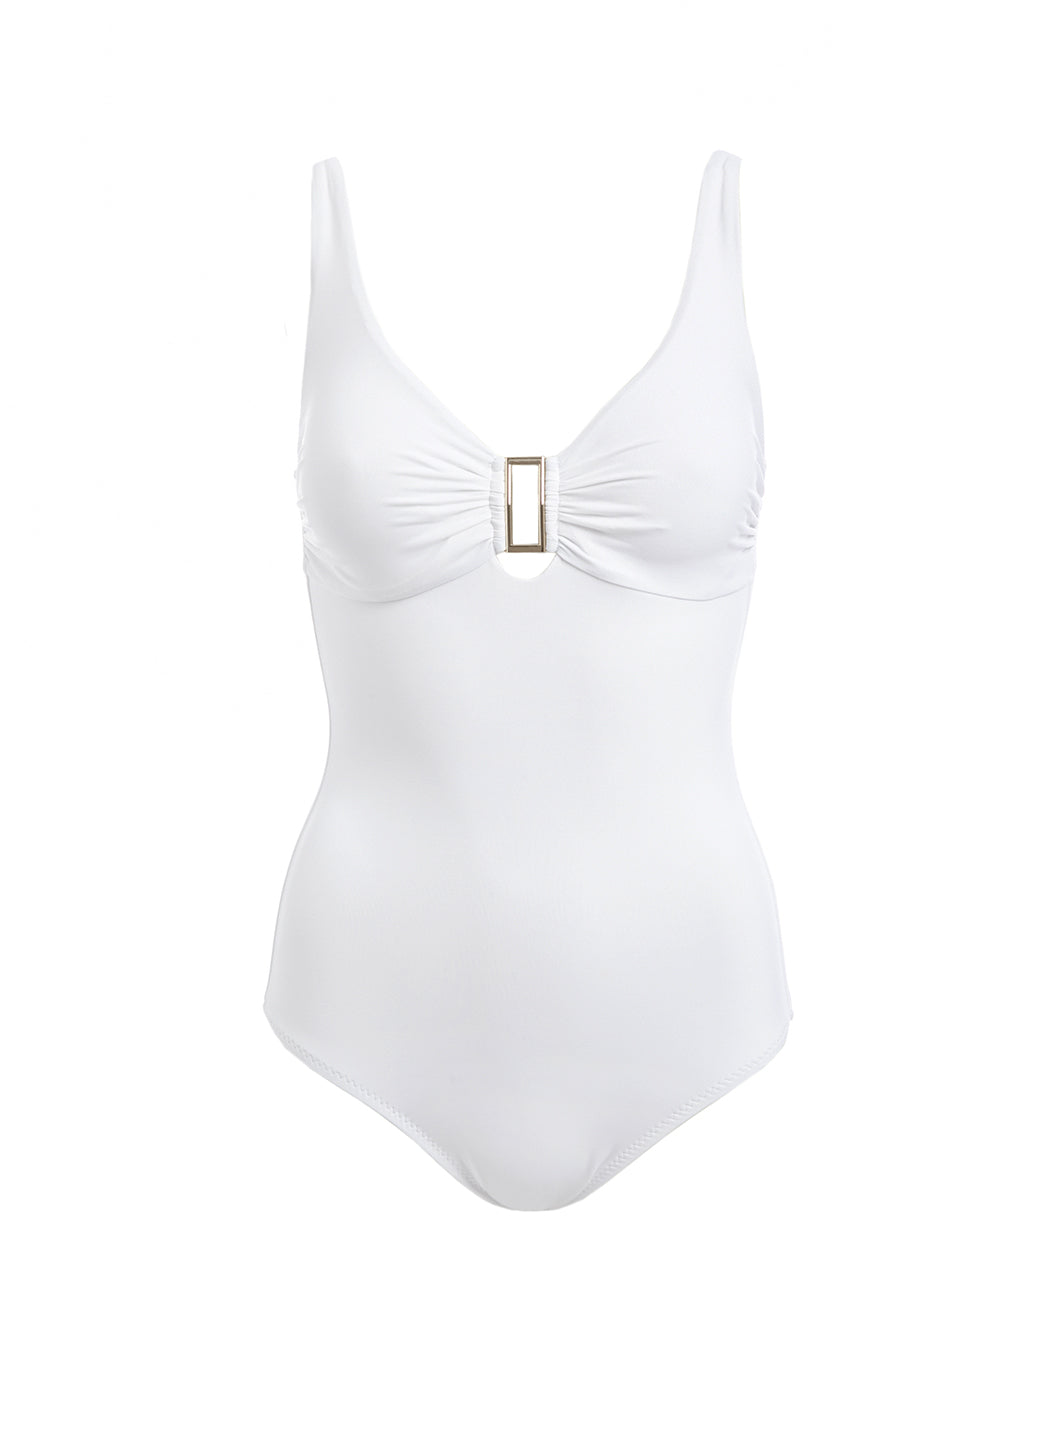 Tuscany White Swimsuit - FINAL SALE